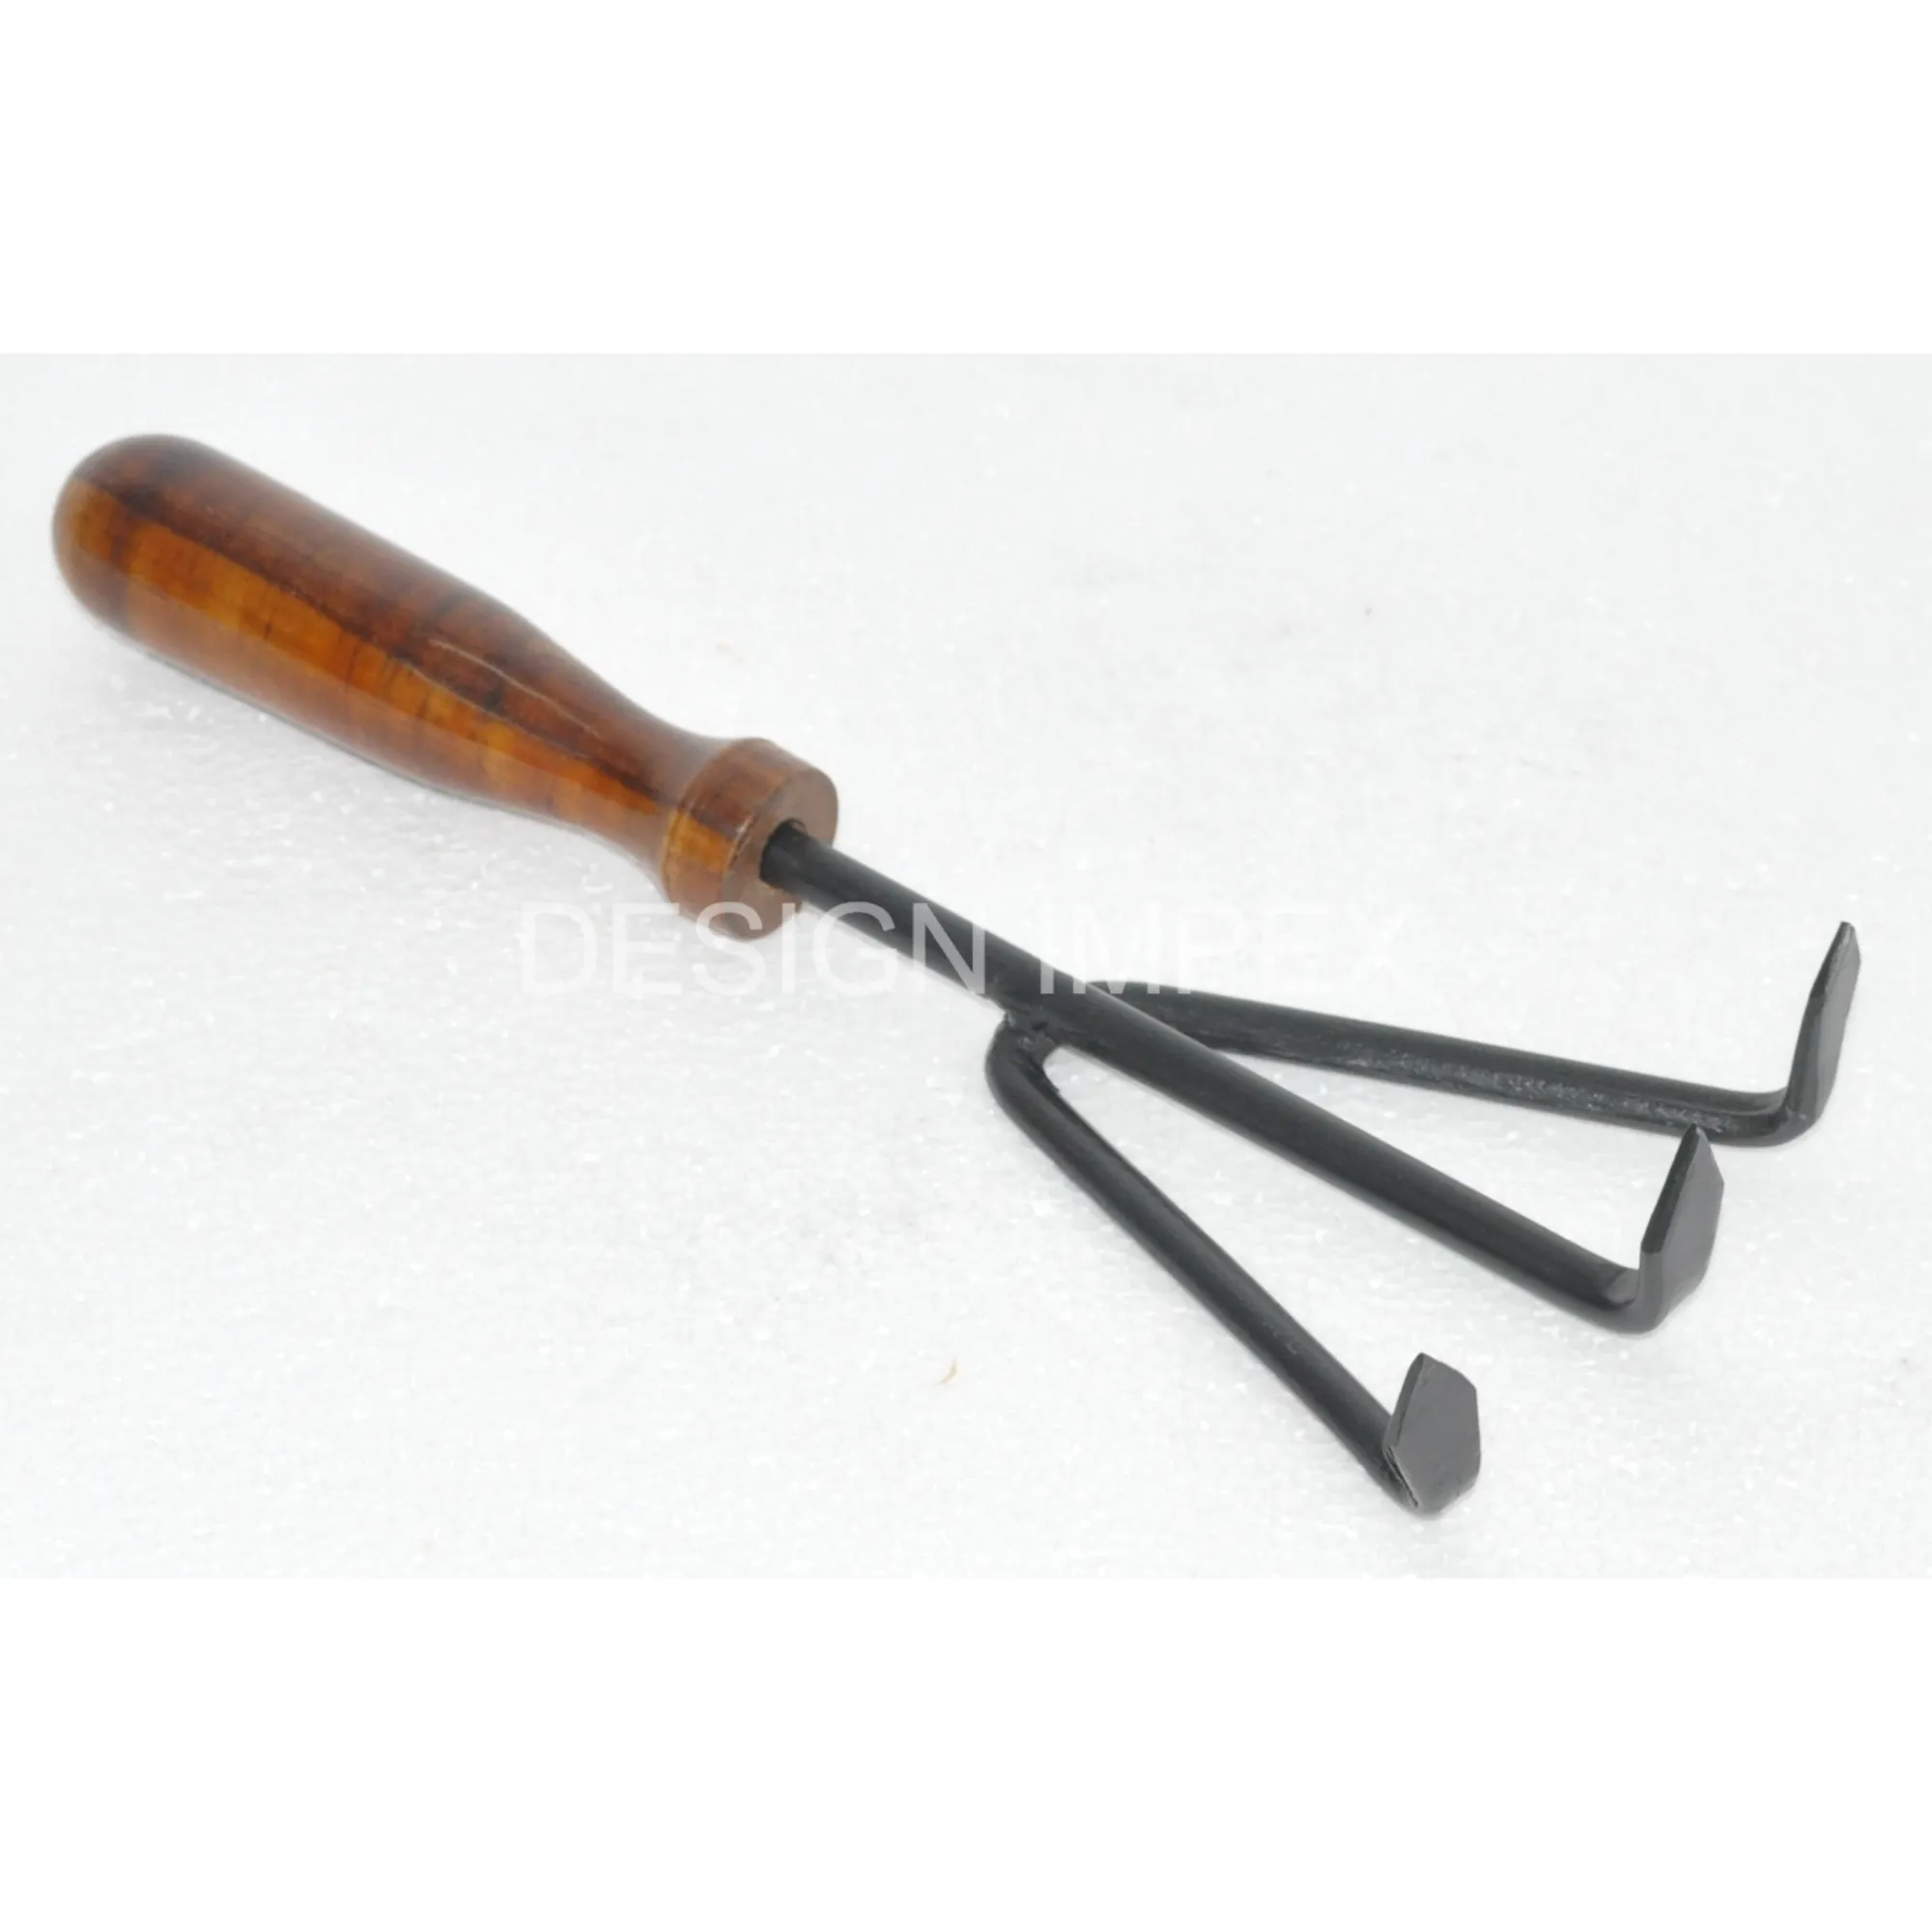 Garden Tool Seeds Cultivator tool Rake with Wooden Handle This field is required